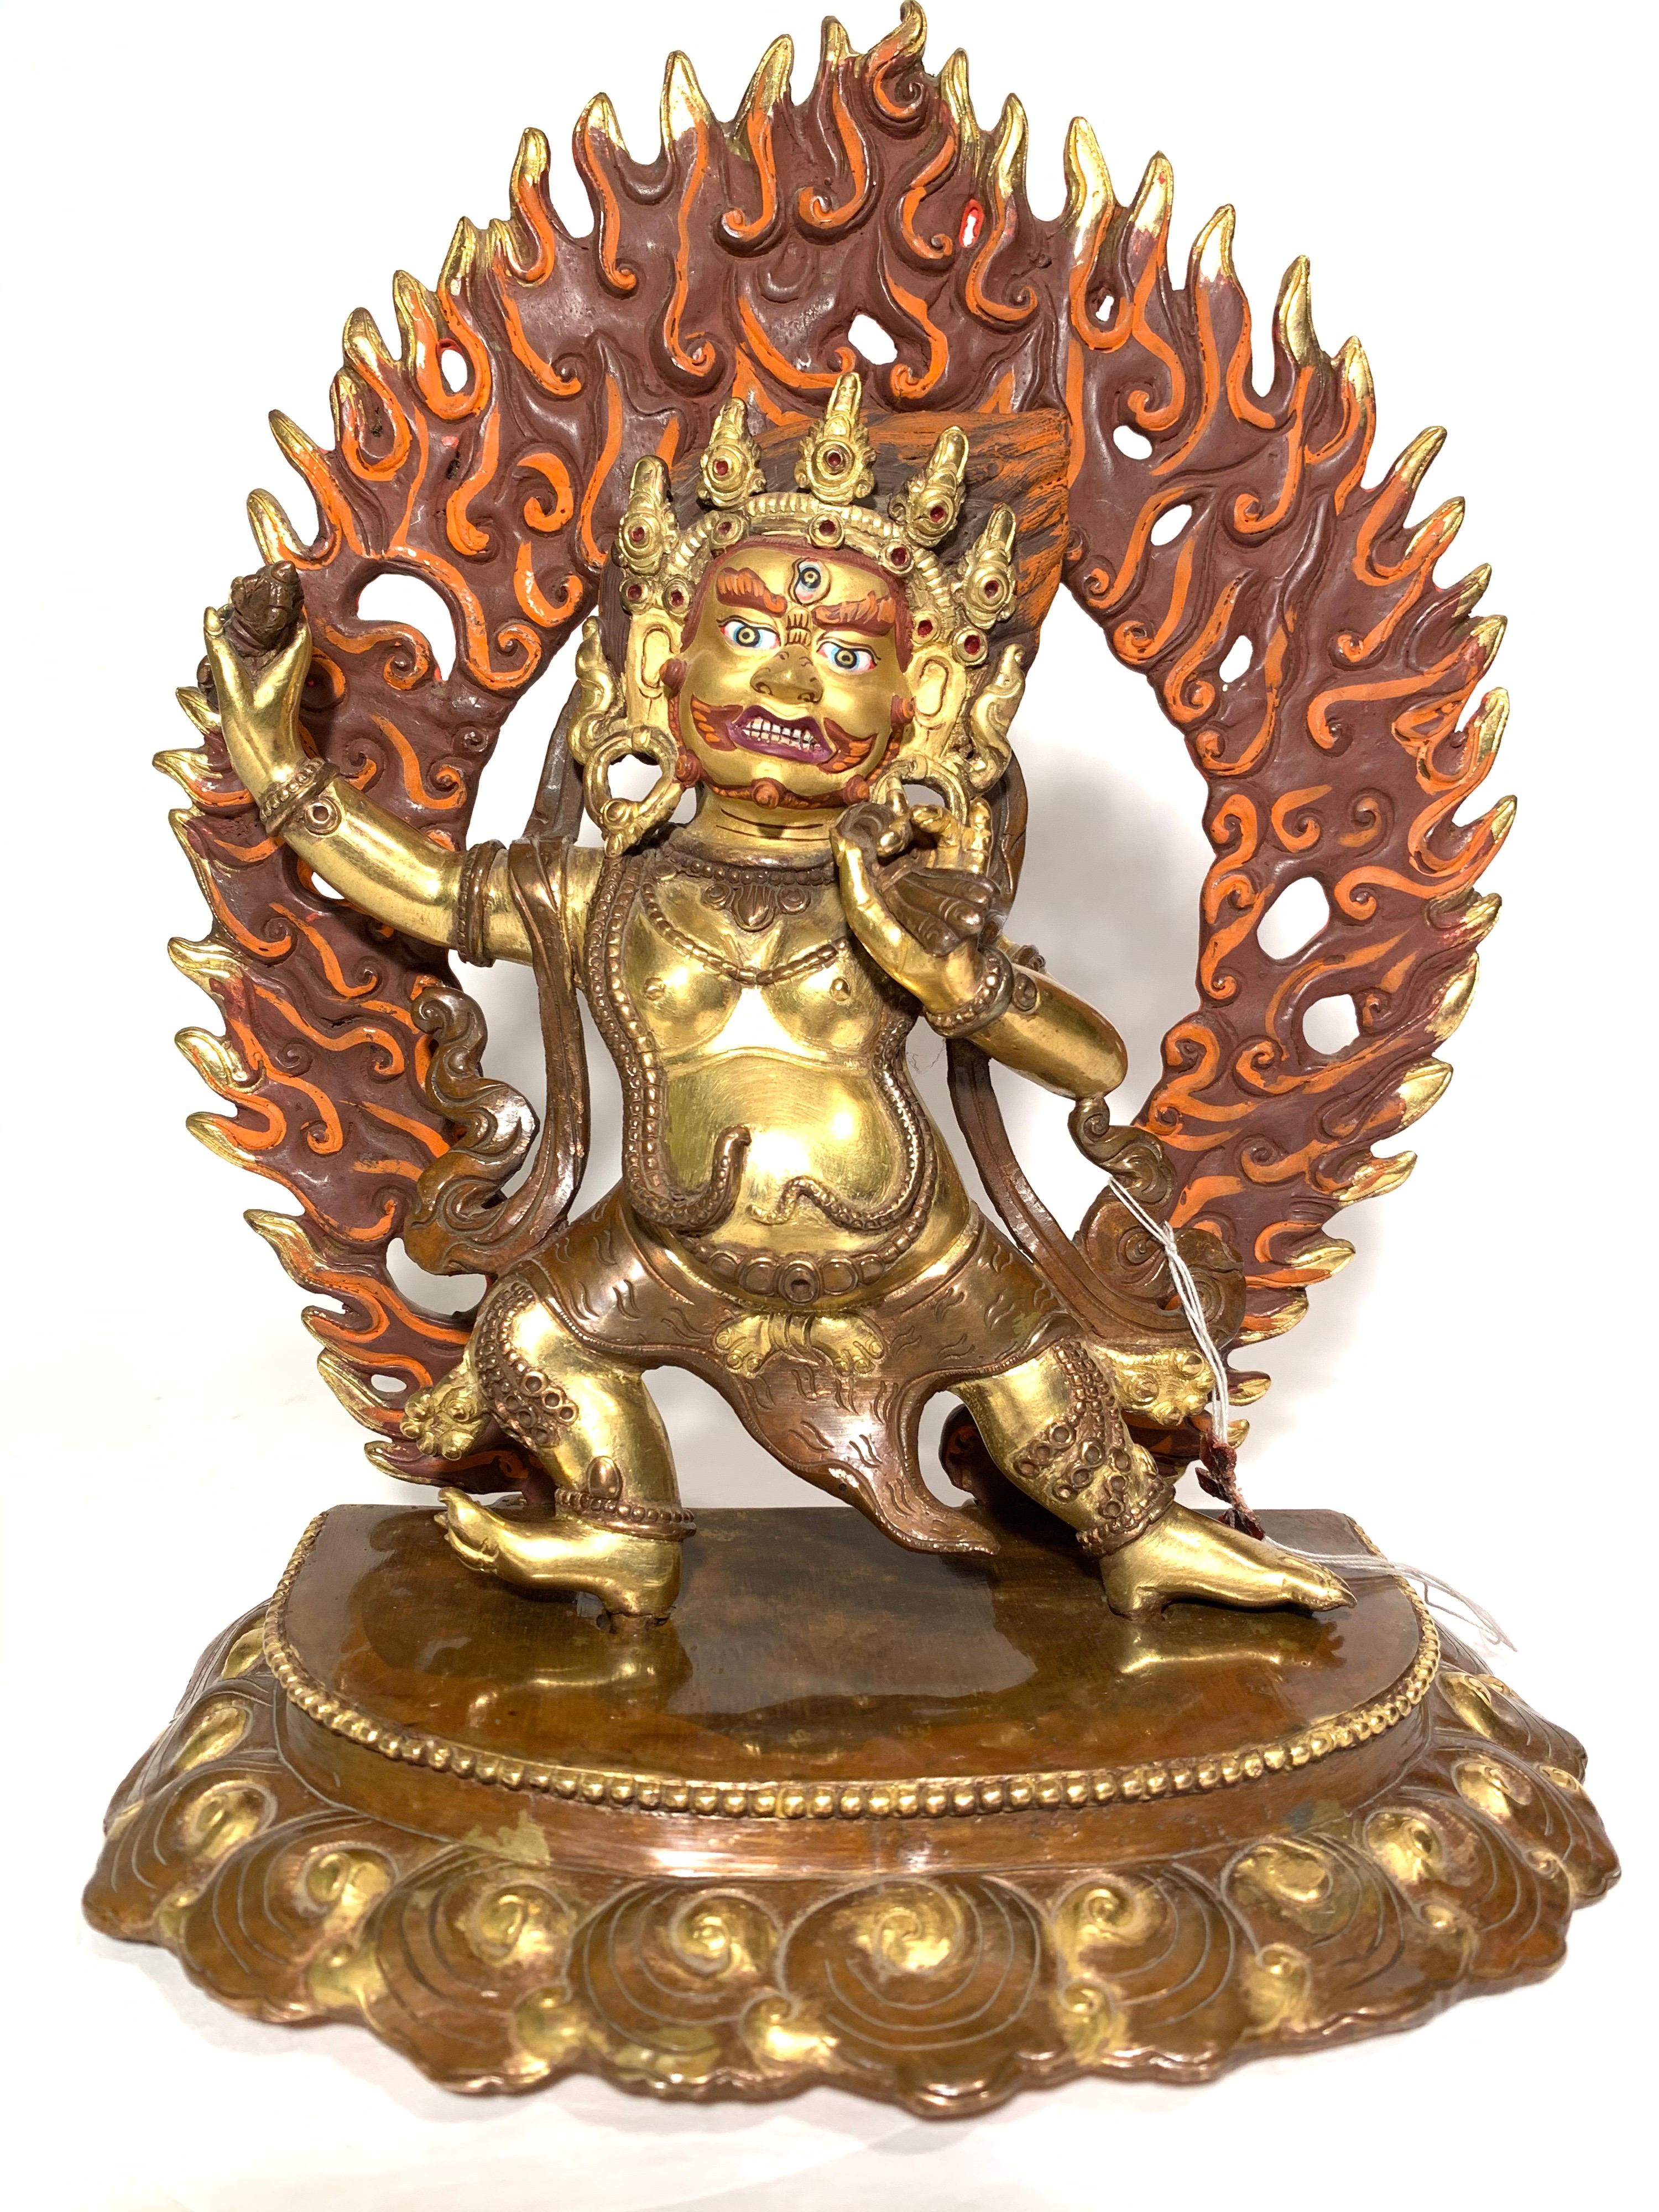 Vajrapani Statue 10 Inch with 24K Gold Handcrafted by Lost Wax Process - Other Art Style Sculpture by Unknown